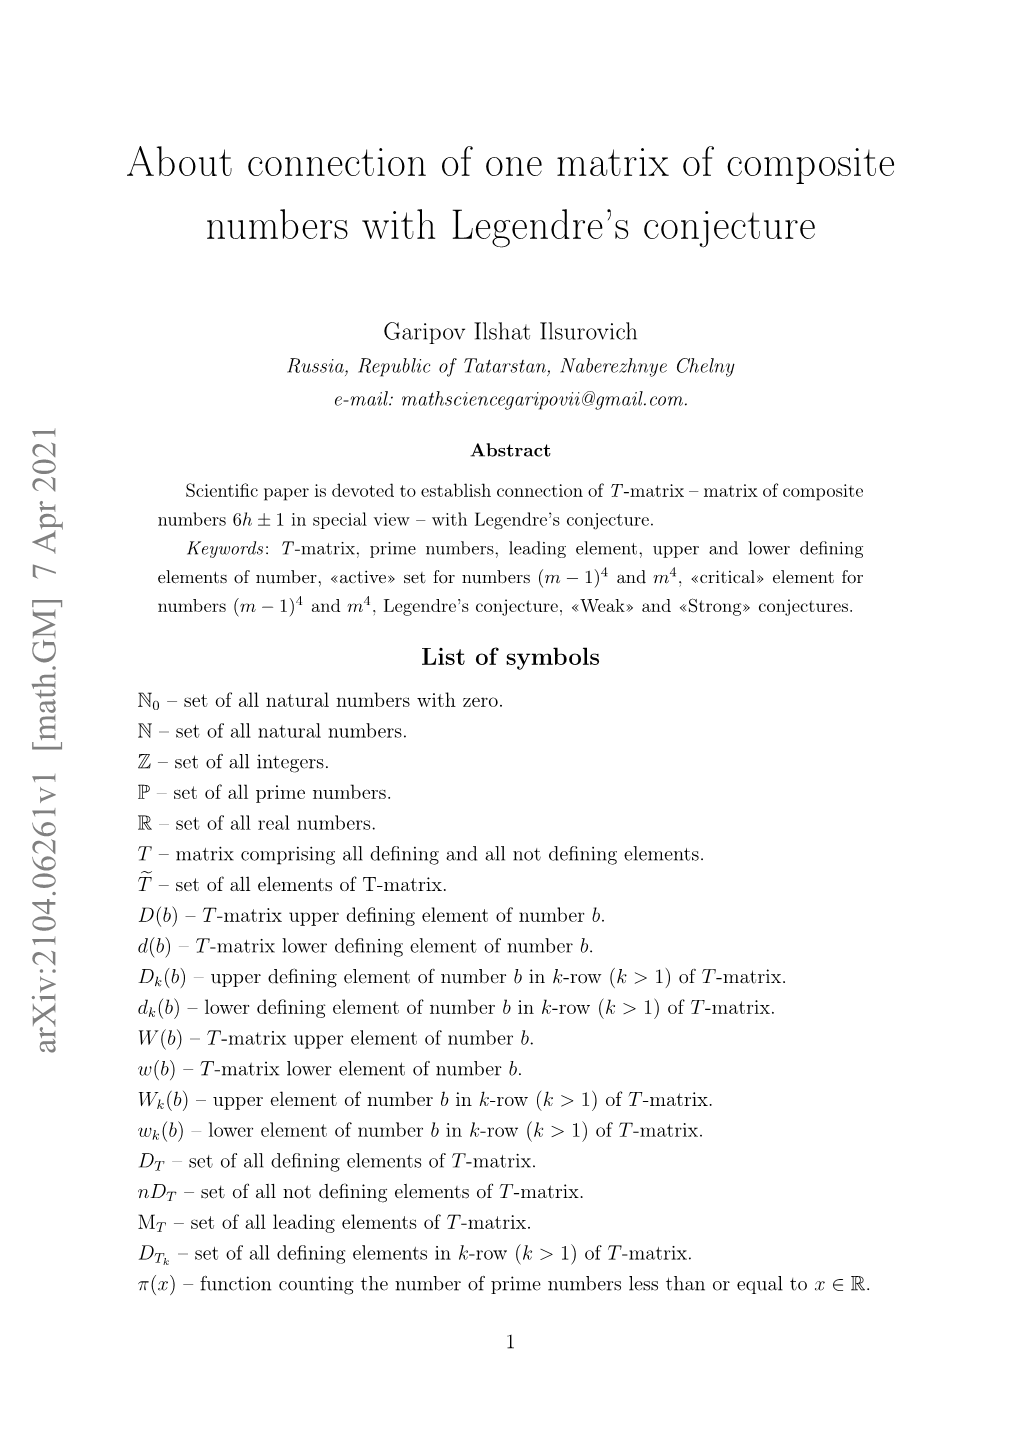 About Connection of One Matrix of Composite Numbers with Legendre's Conjecture